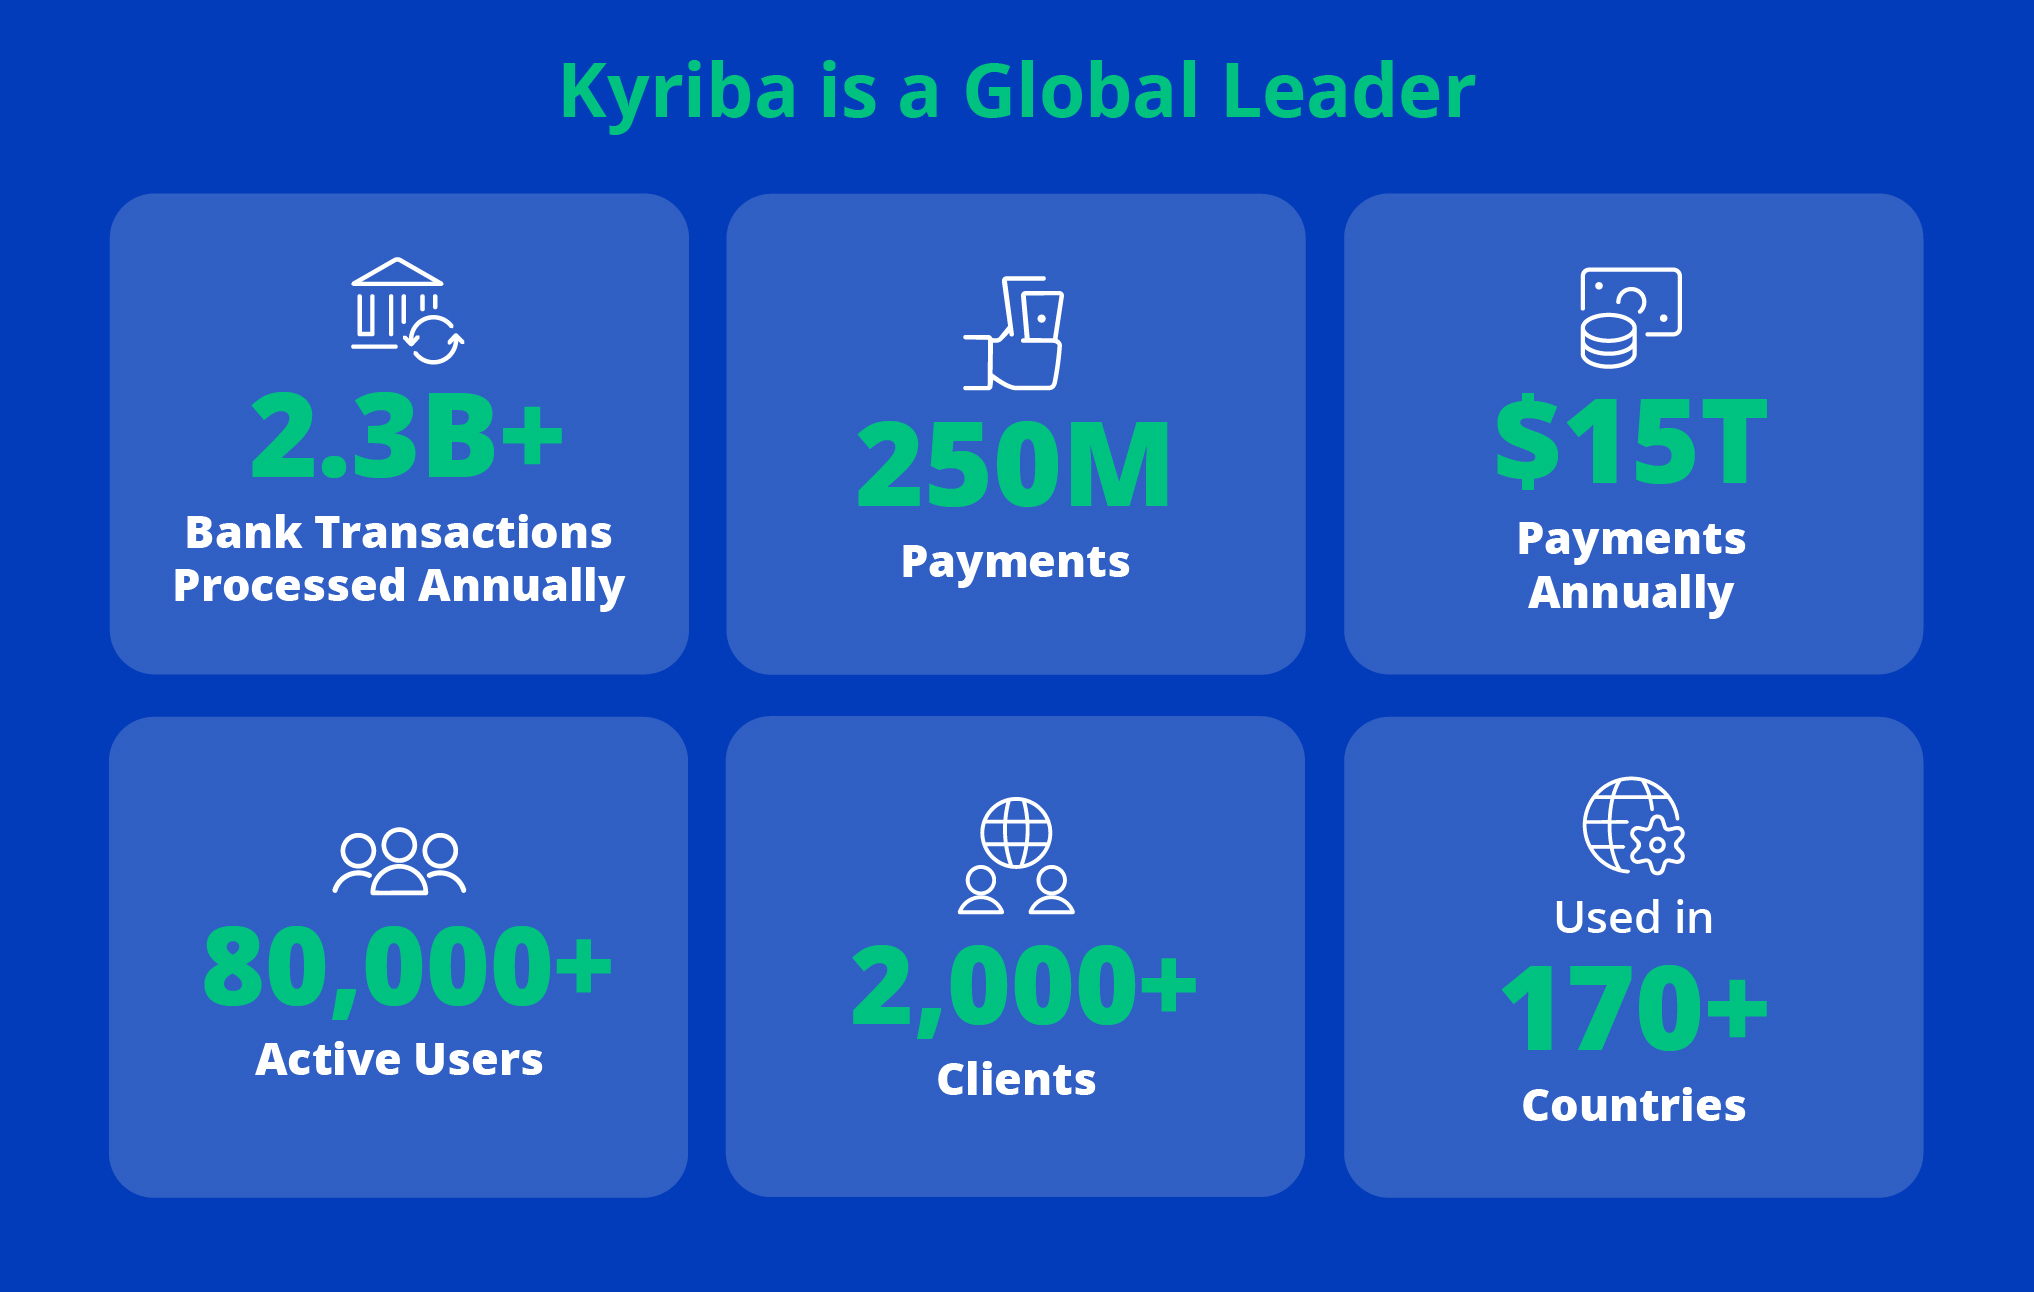 Kyriba is a global leader in cloud treasury and finance solution